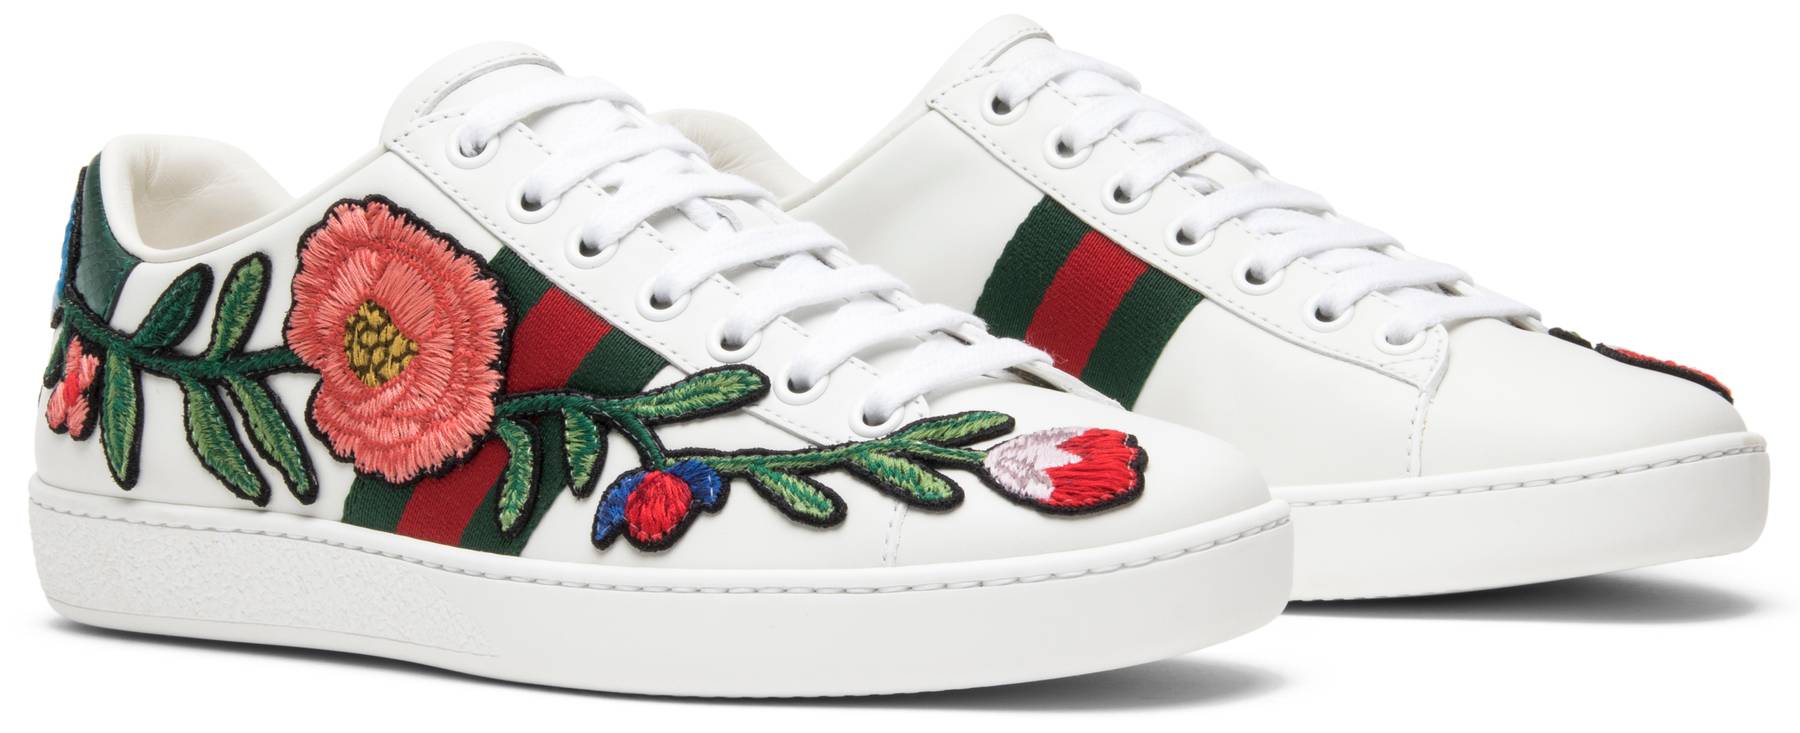 Gucci Wmns Ace Embroidered 'Floral' - Gucci - 431917 A38G0 9064 | GOAT